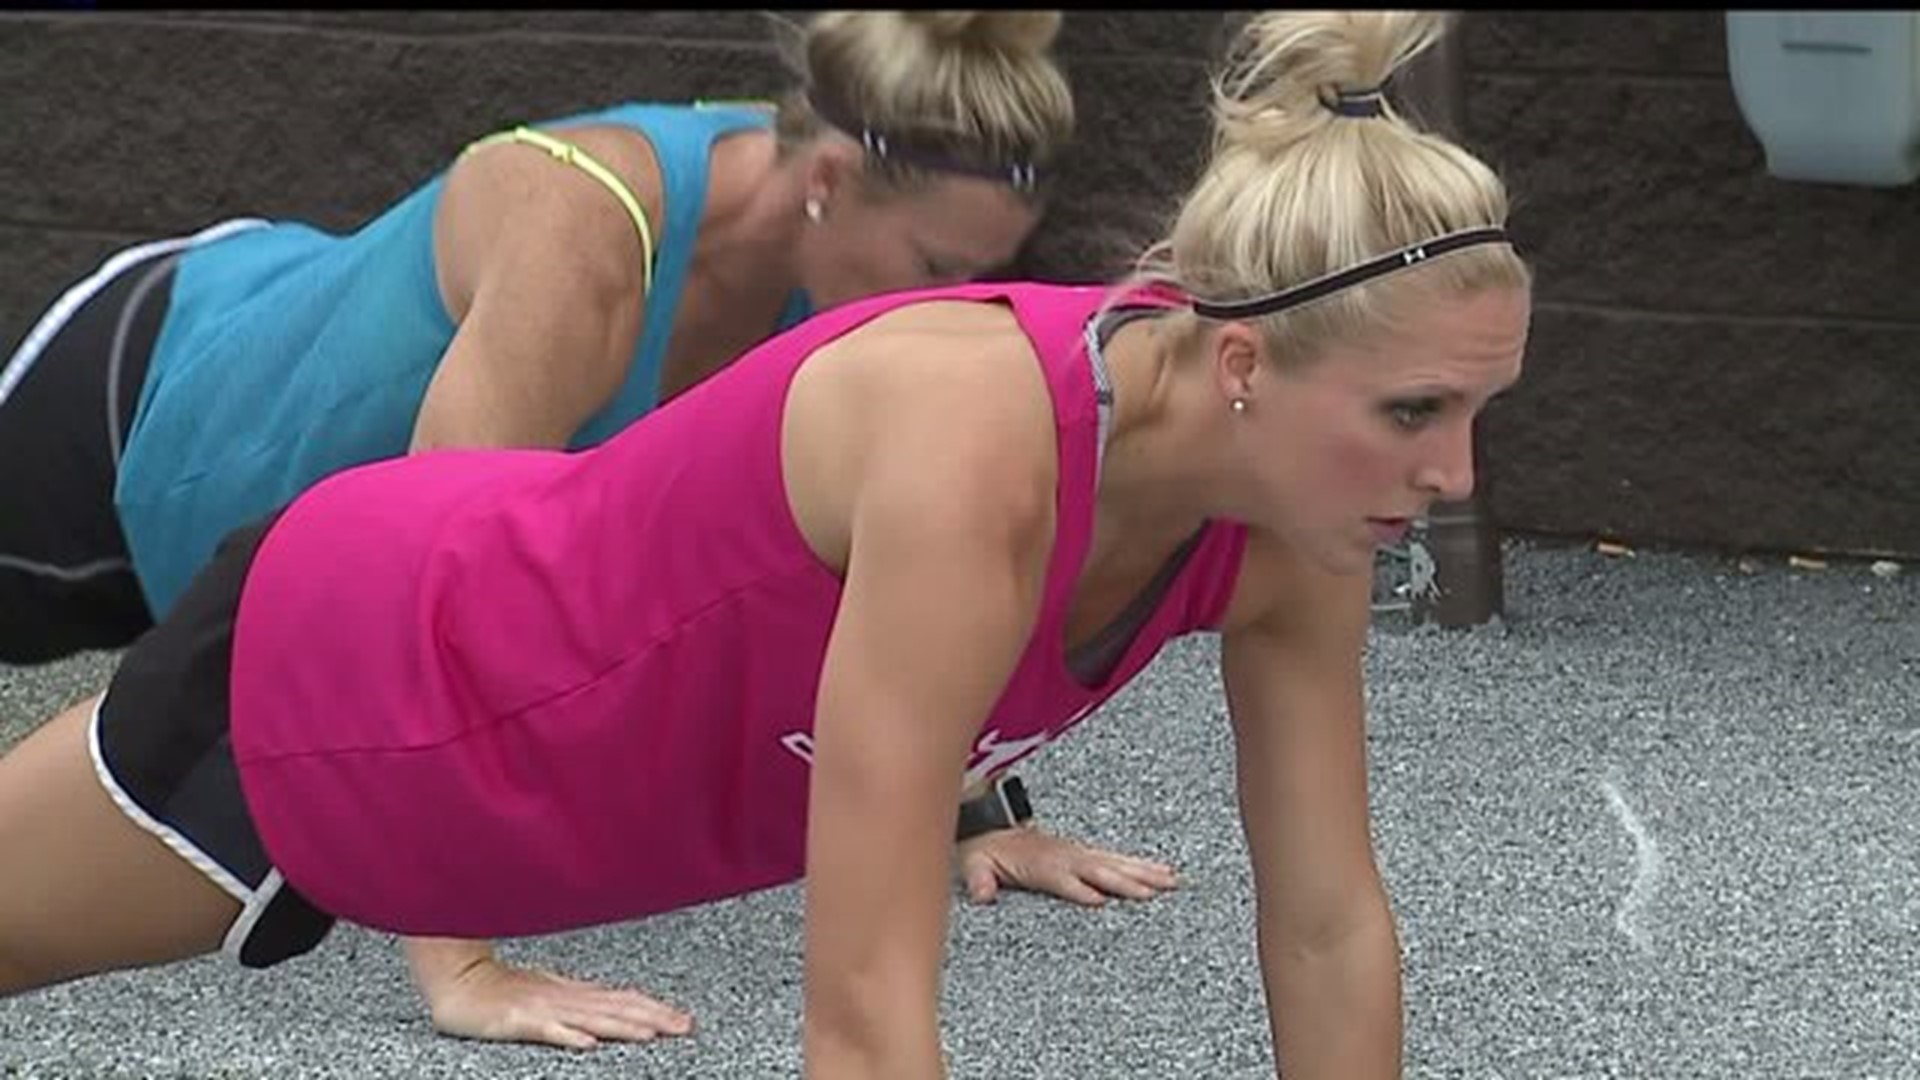 Three local athletes have qualified for the Spartan Race World Championship